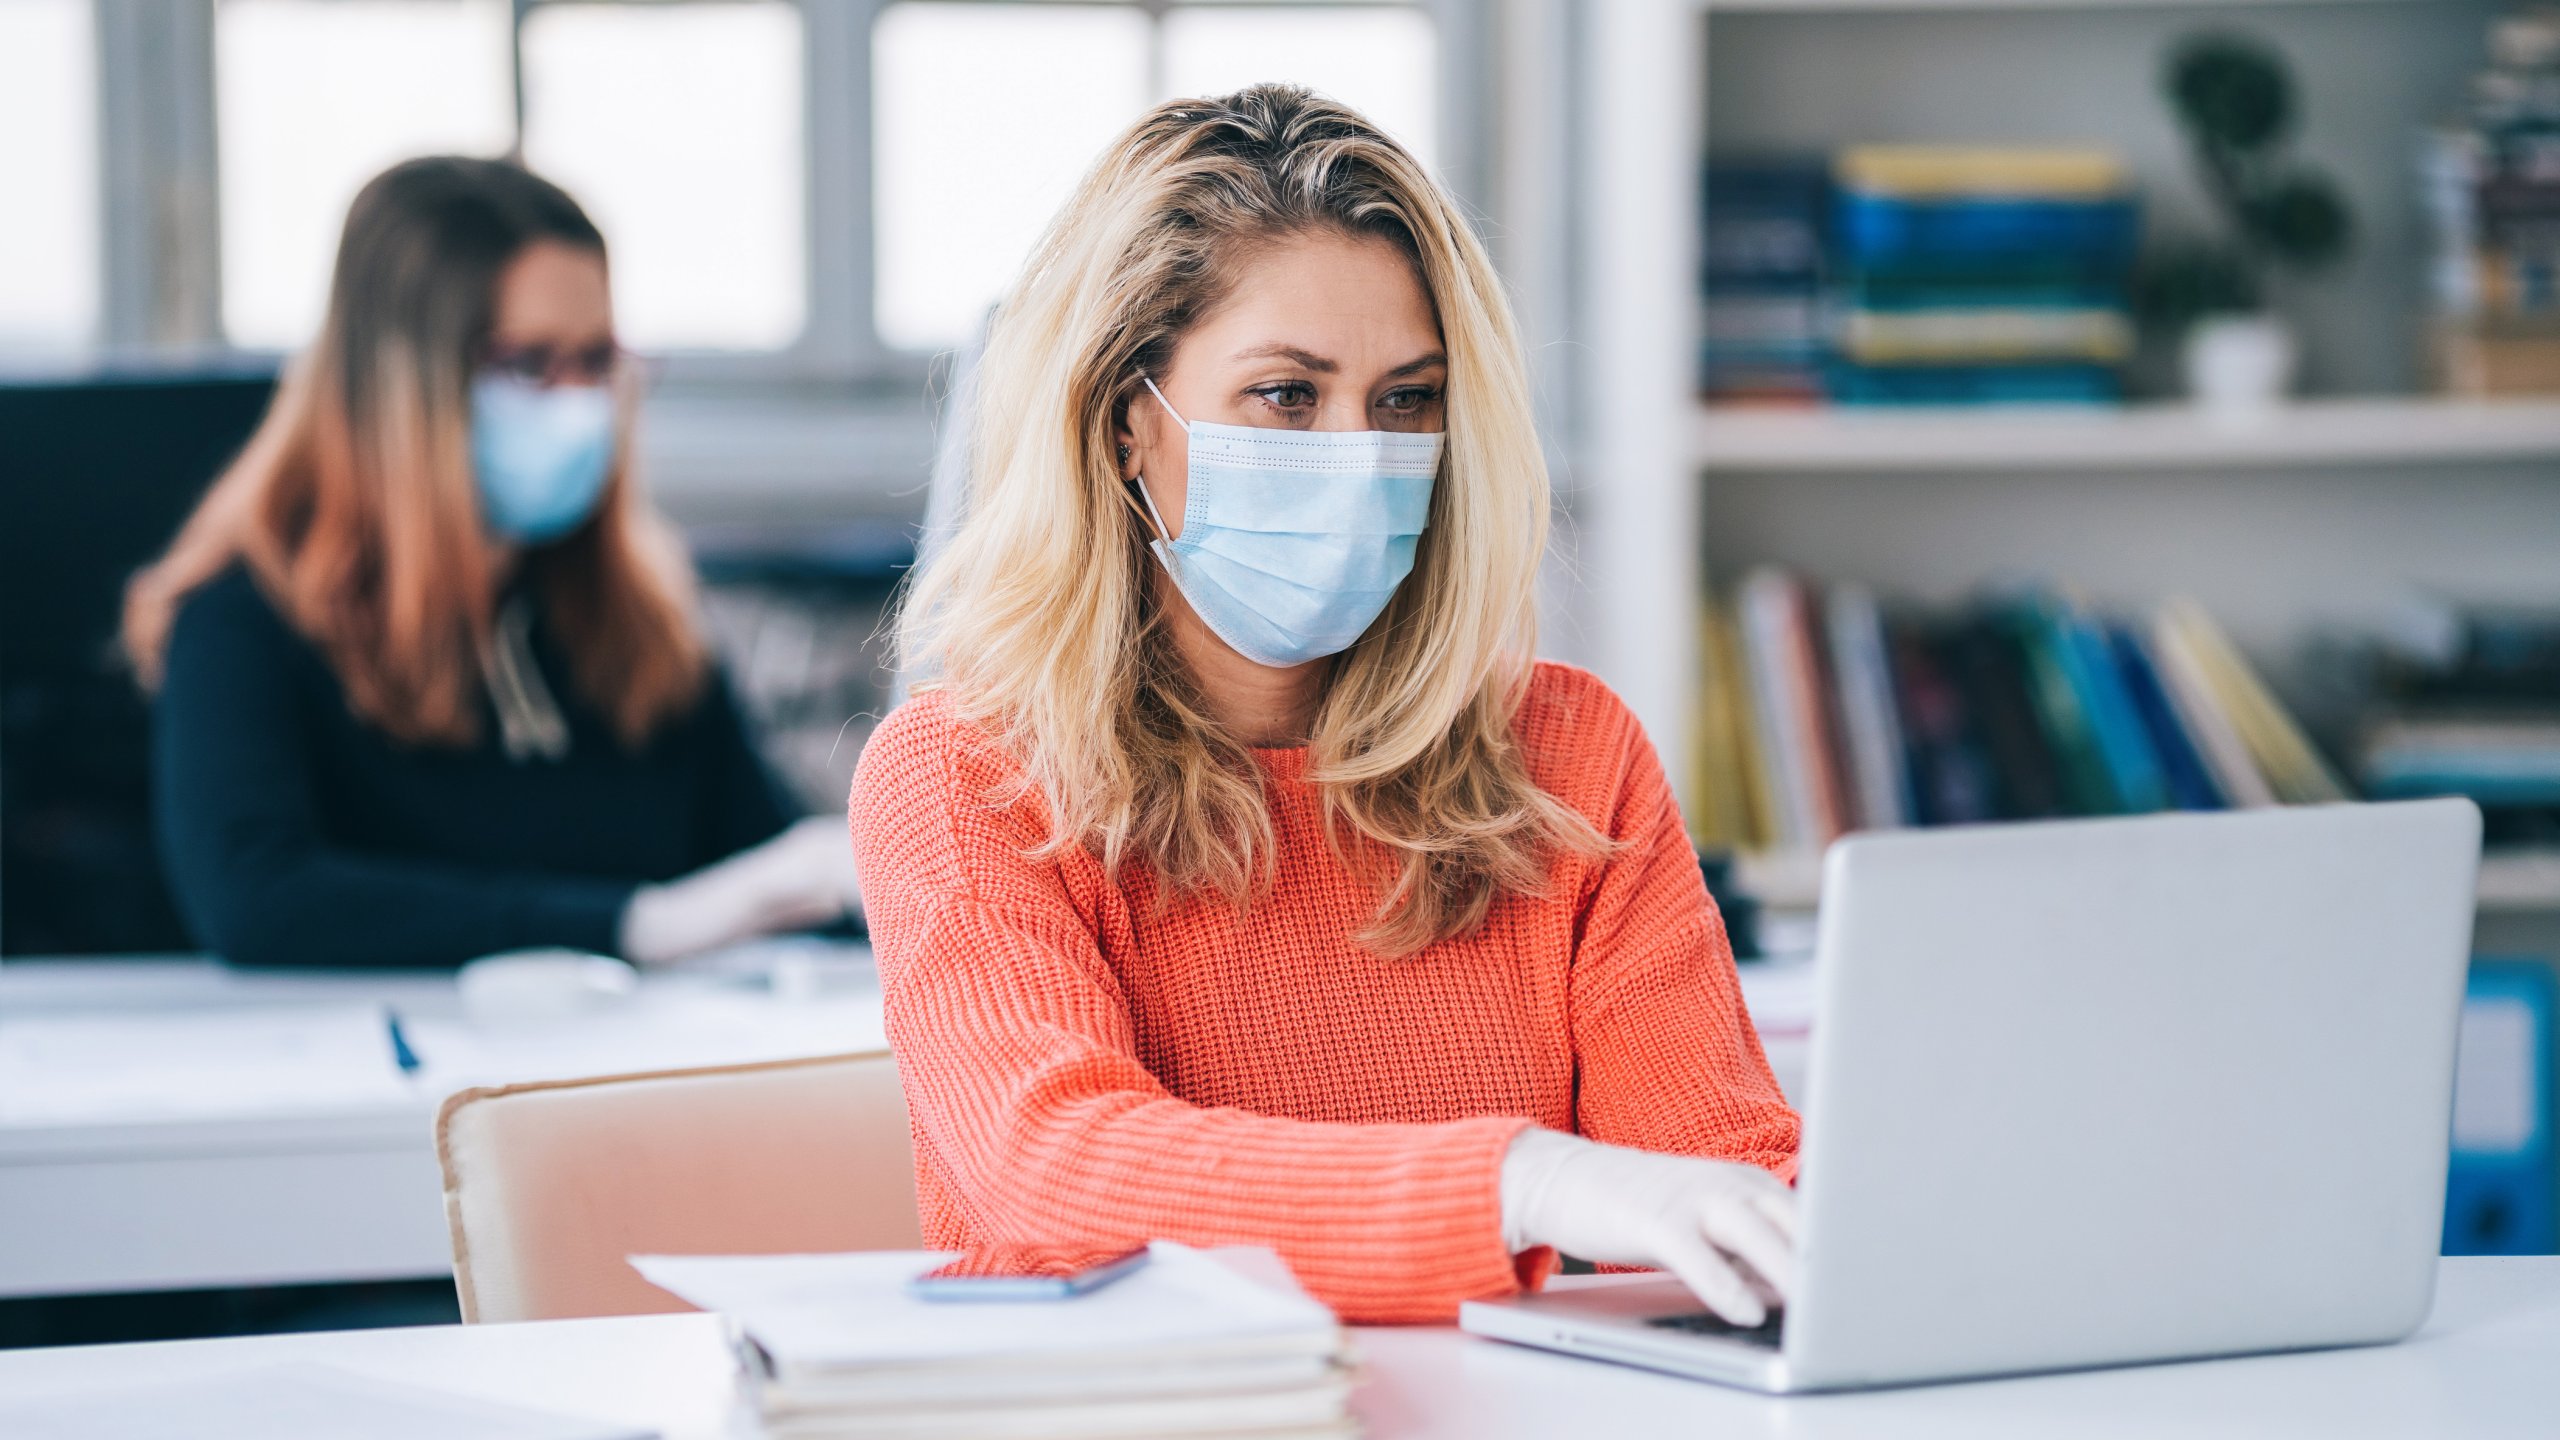 Colleagues in the office working while wearing medical face mask during COVID-19